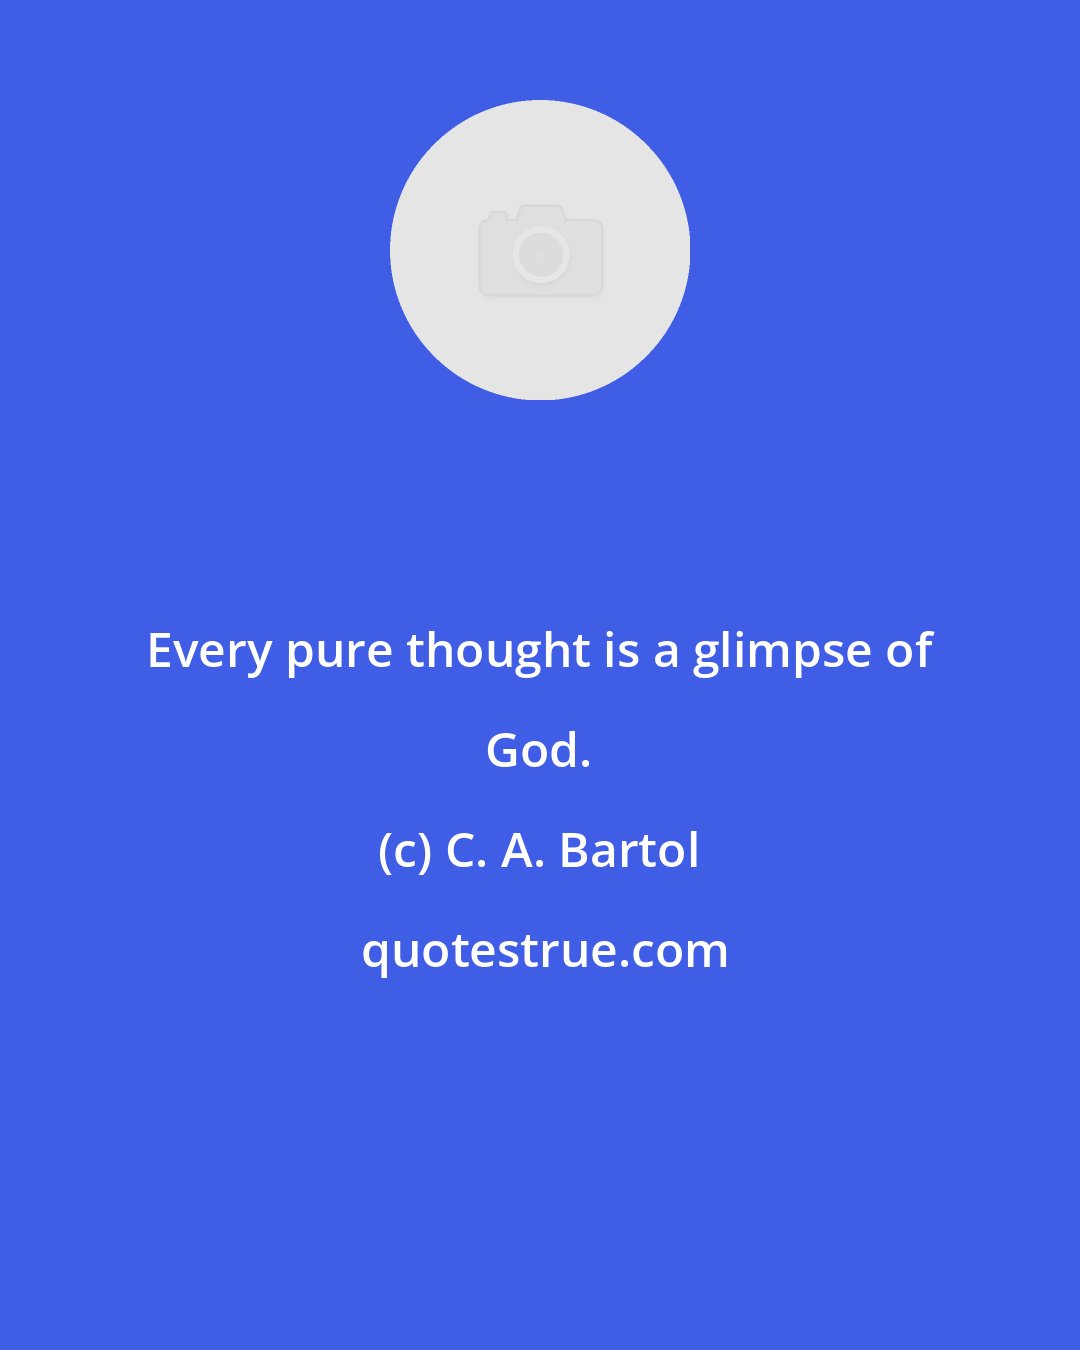 C. A. Bartol: Every pure thought is a glimpse of God.